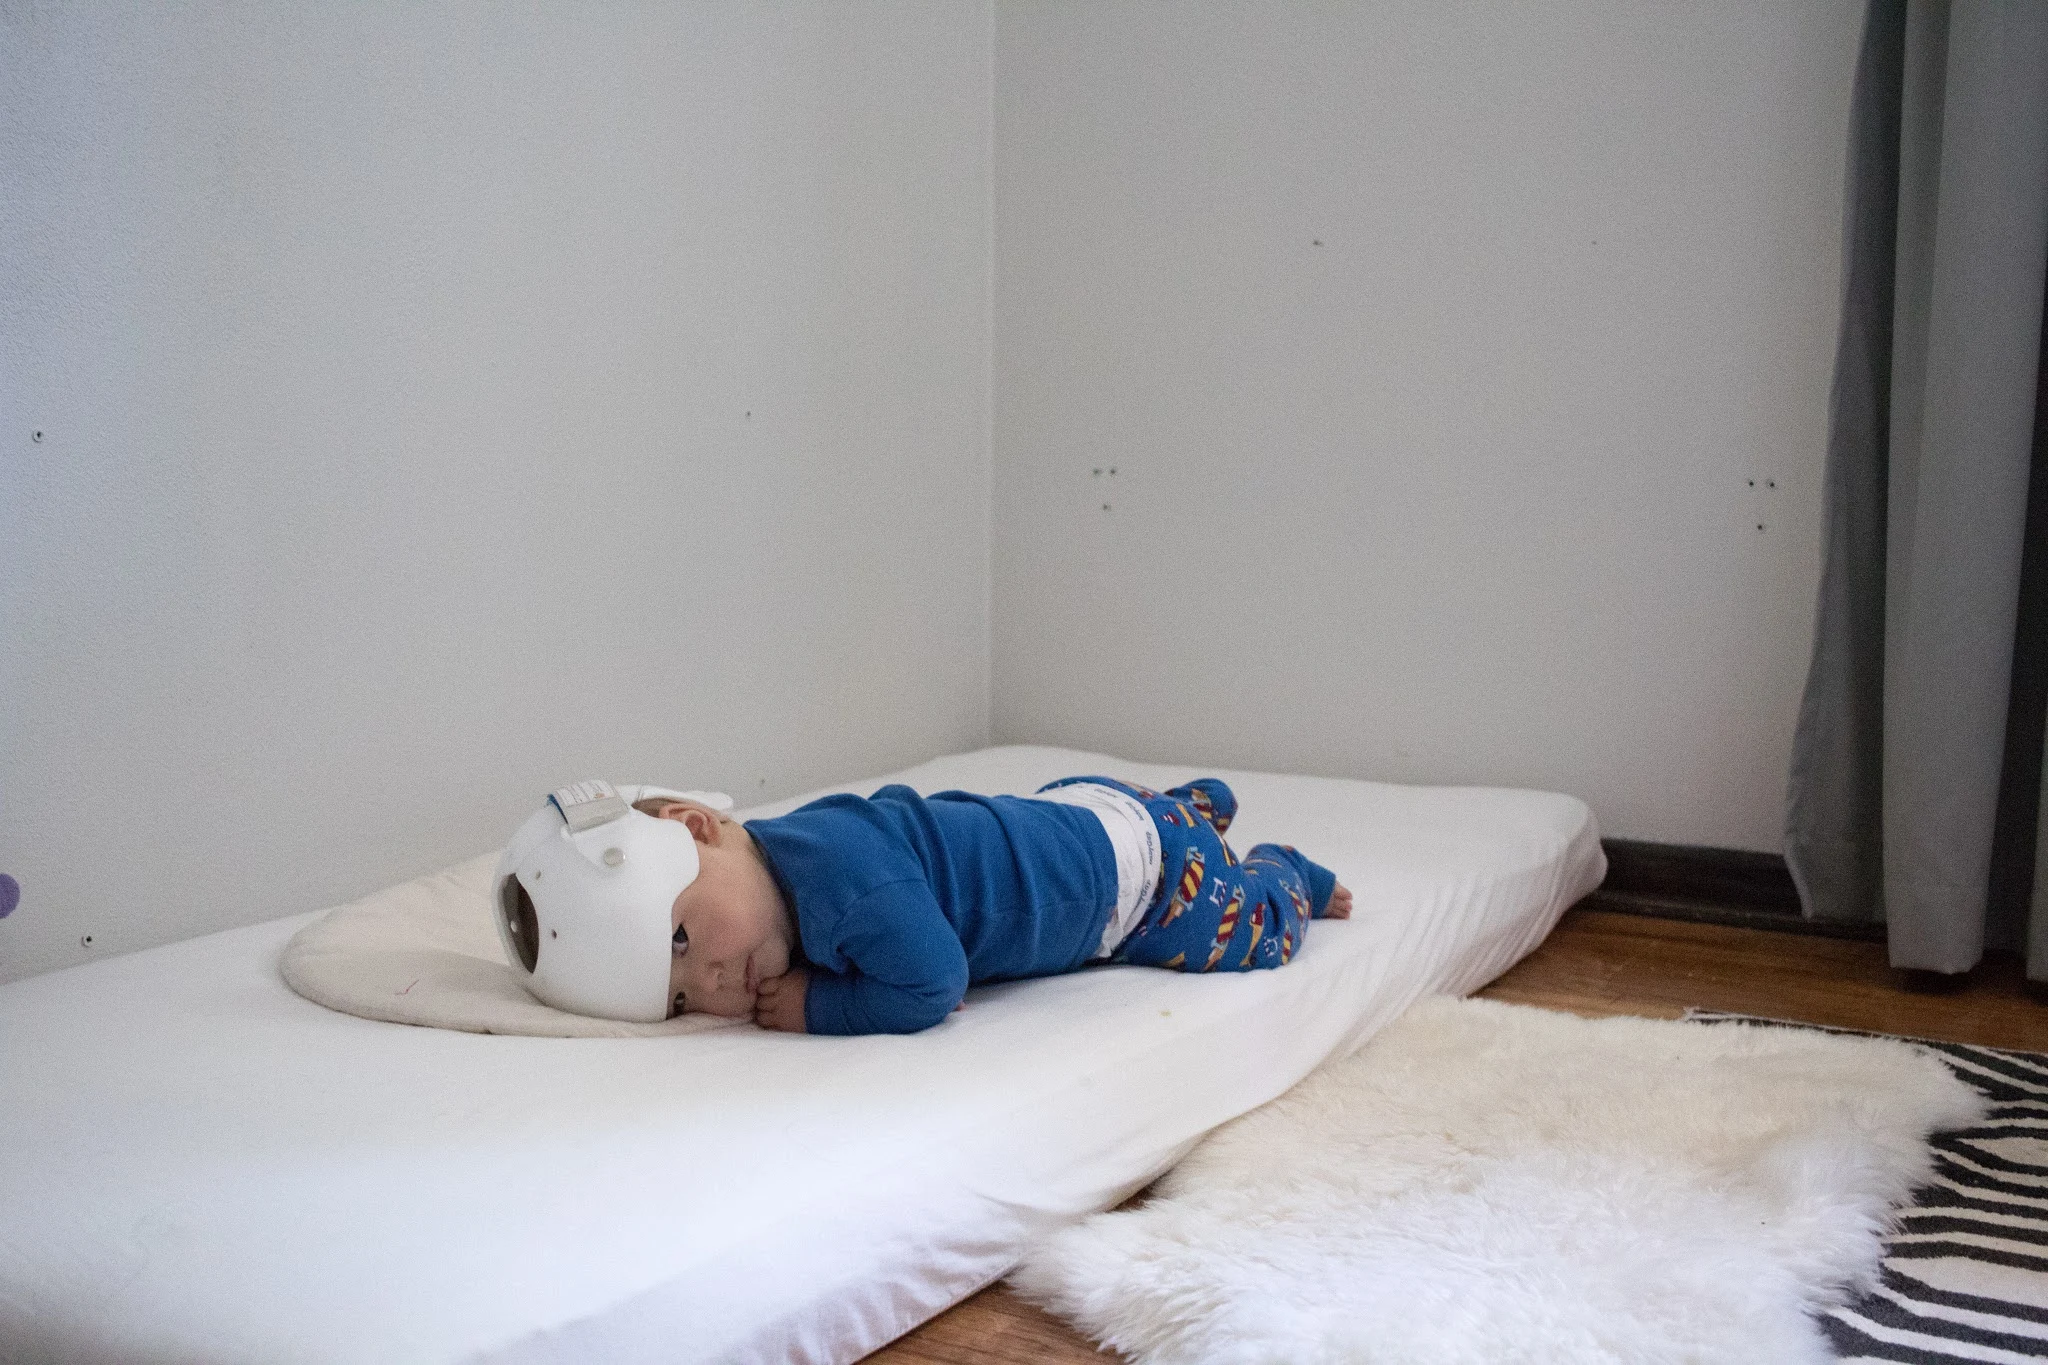 Using a Montessori floor bed for your baby from birth is very different from a crib. Here are some of the realities of using a floor bed from birth.